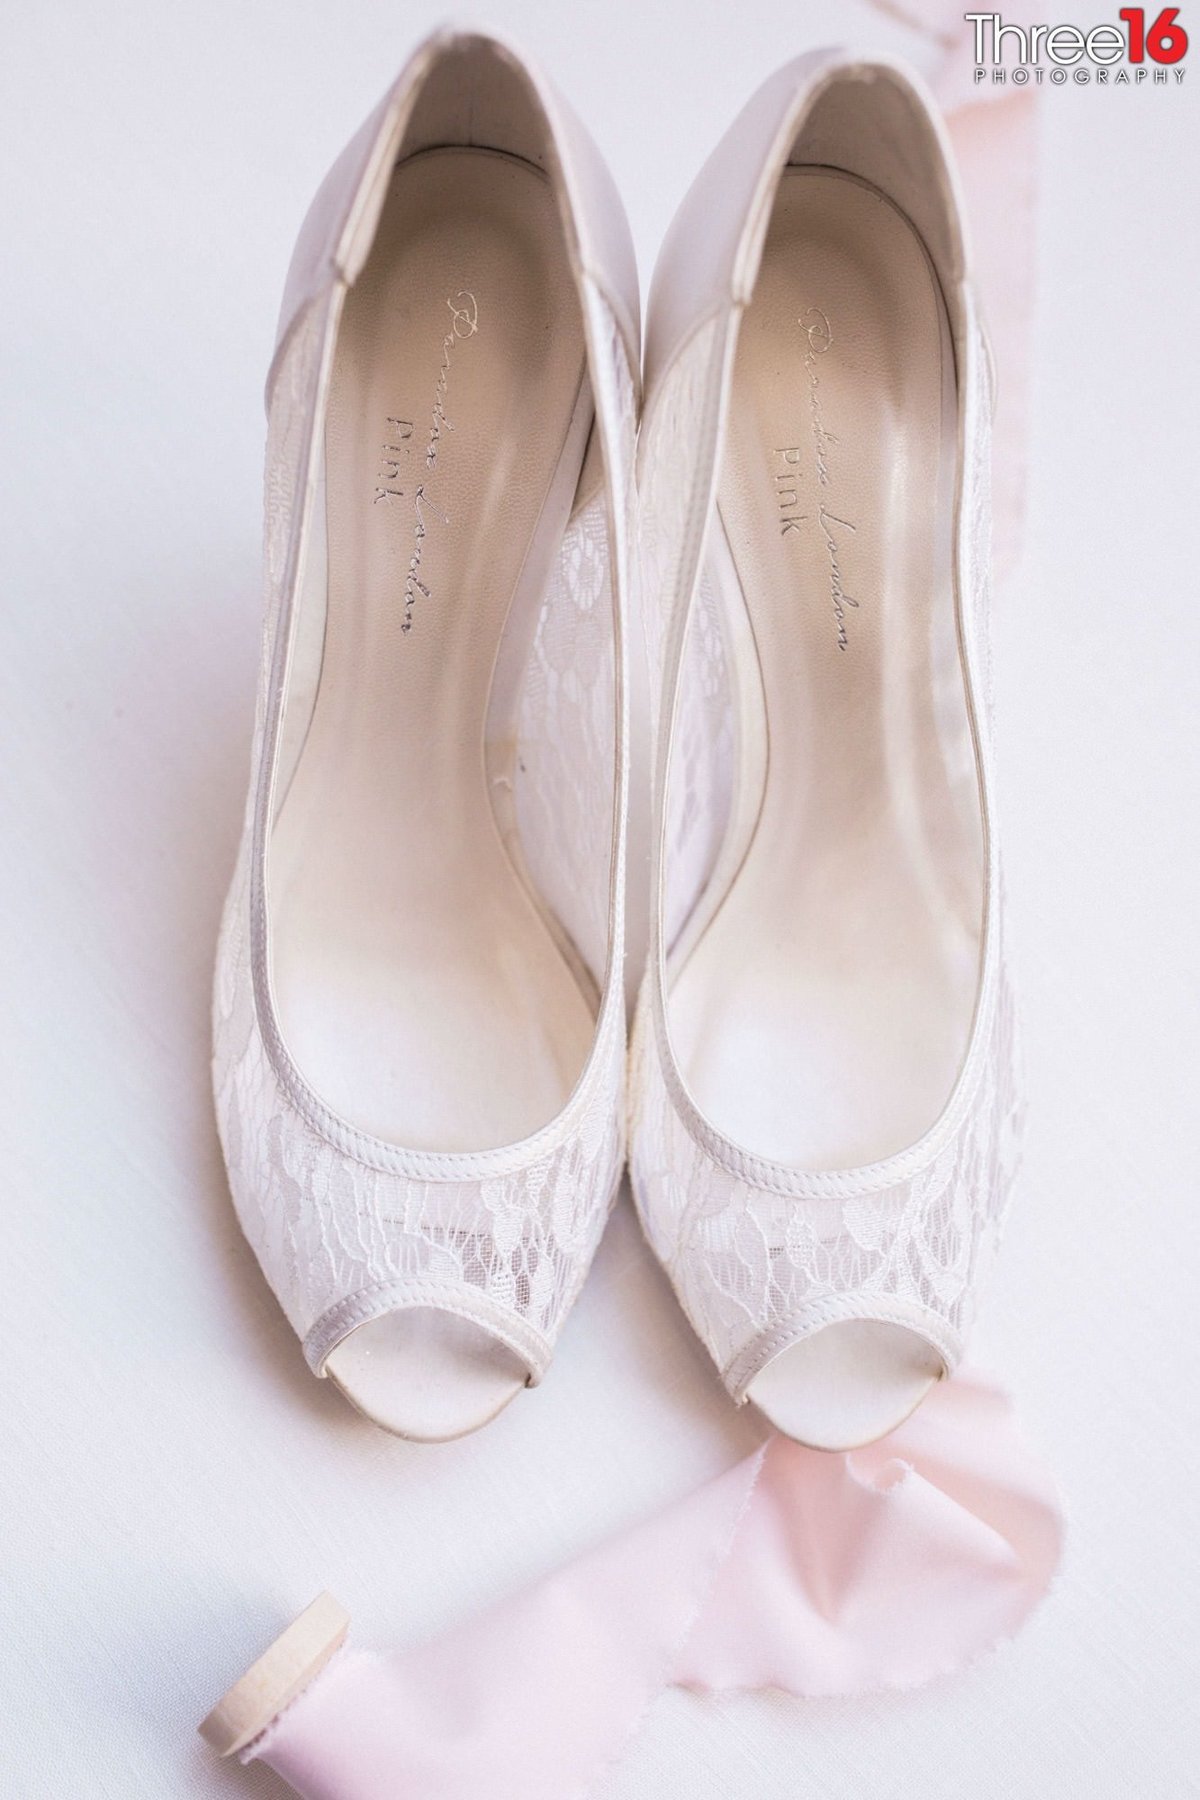 Bride's wedding day laced shoes